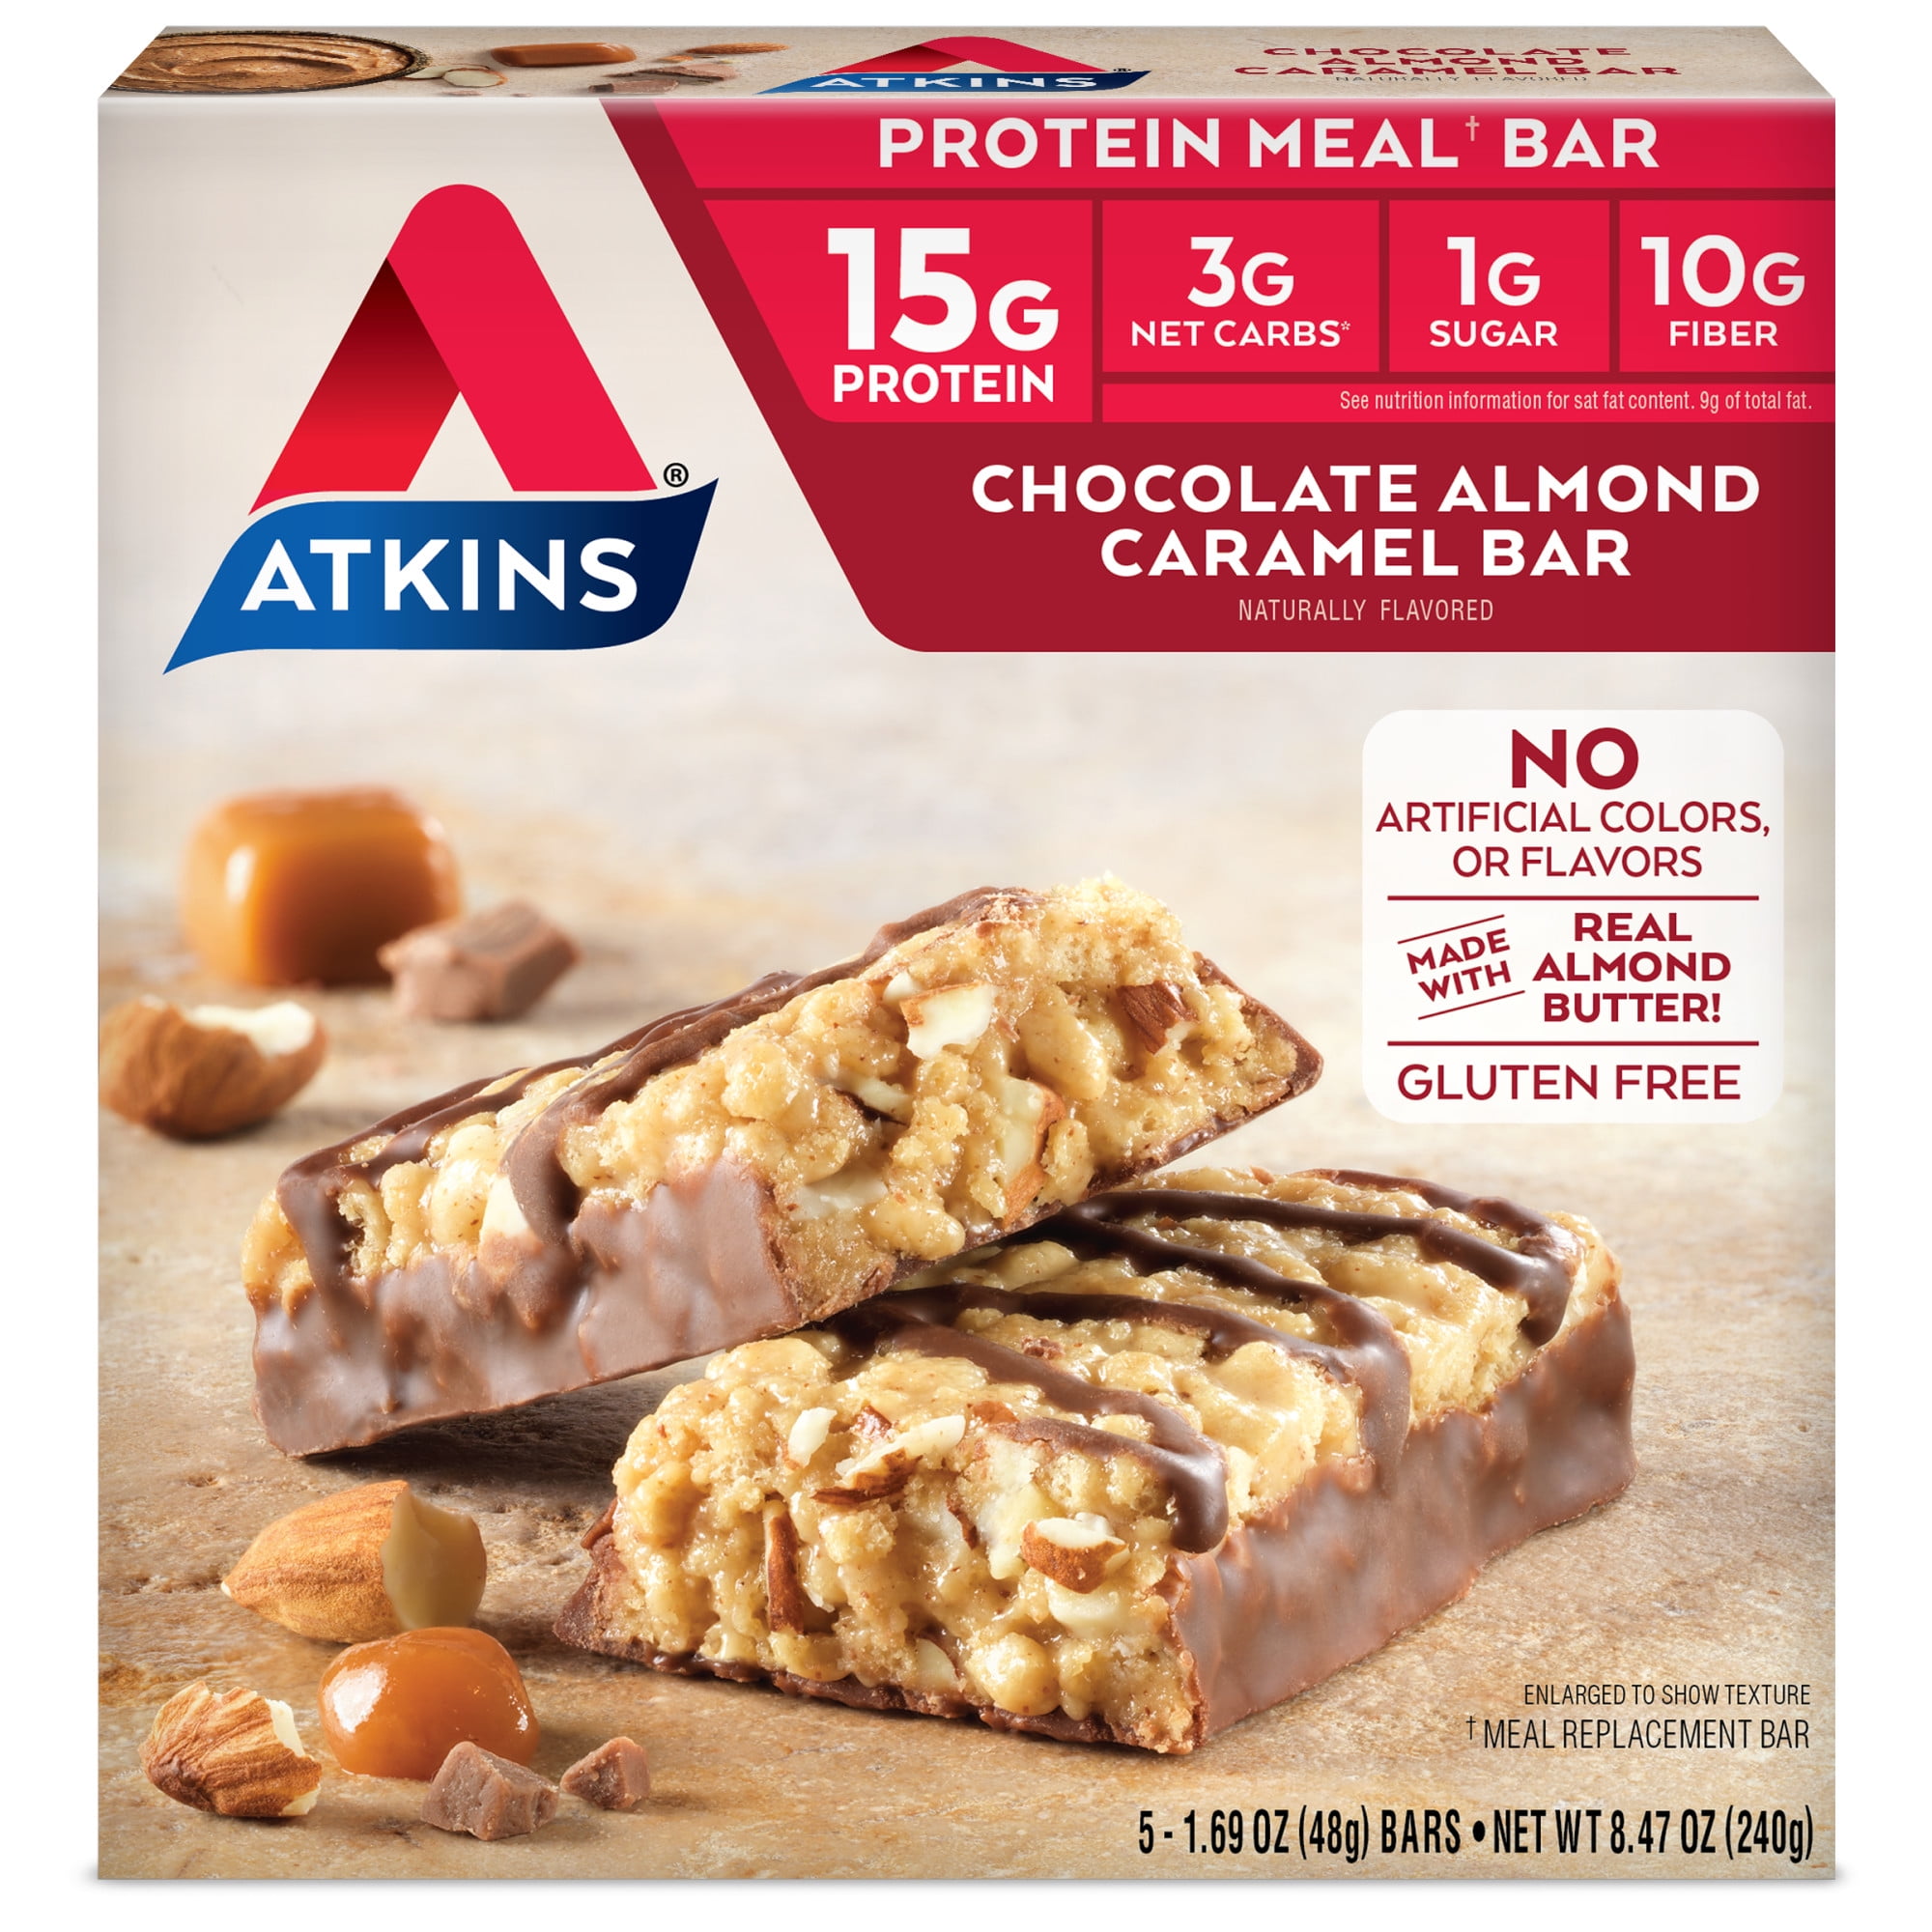 Atkins Protein-Rich Meal Bar, Chocolate Almond Caramel, Keto Friendly, 5 Count